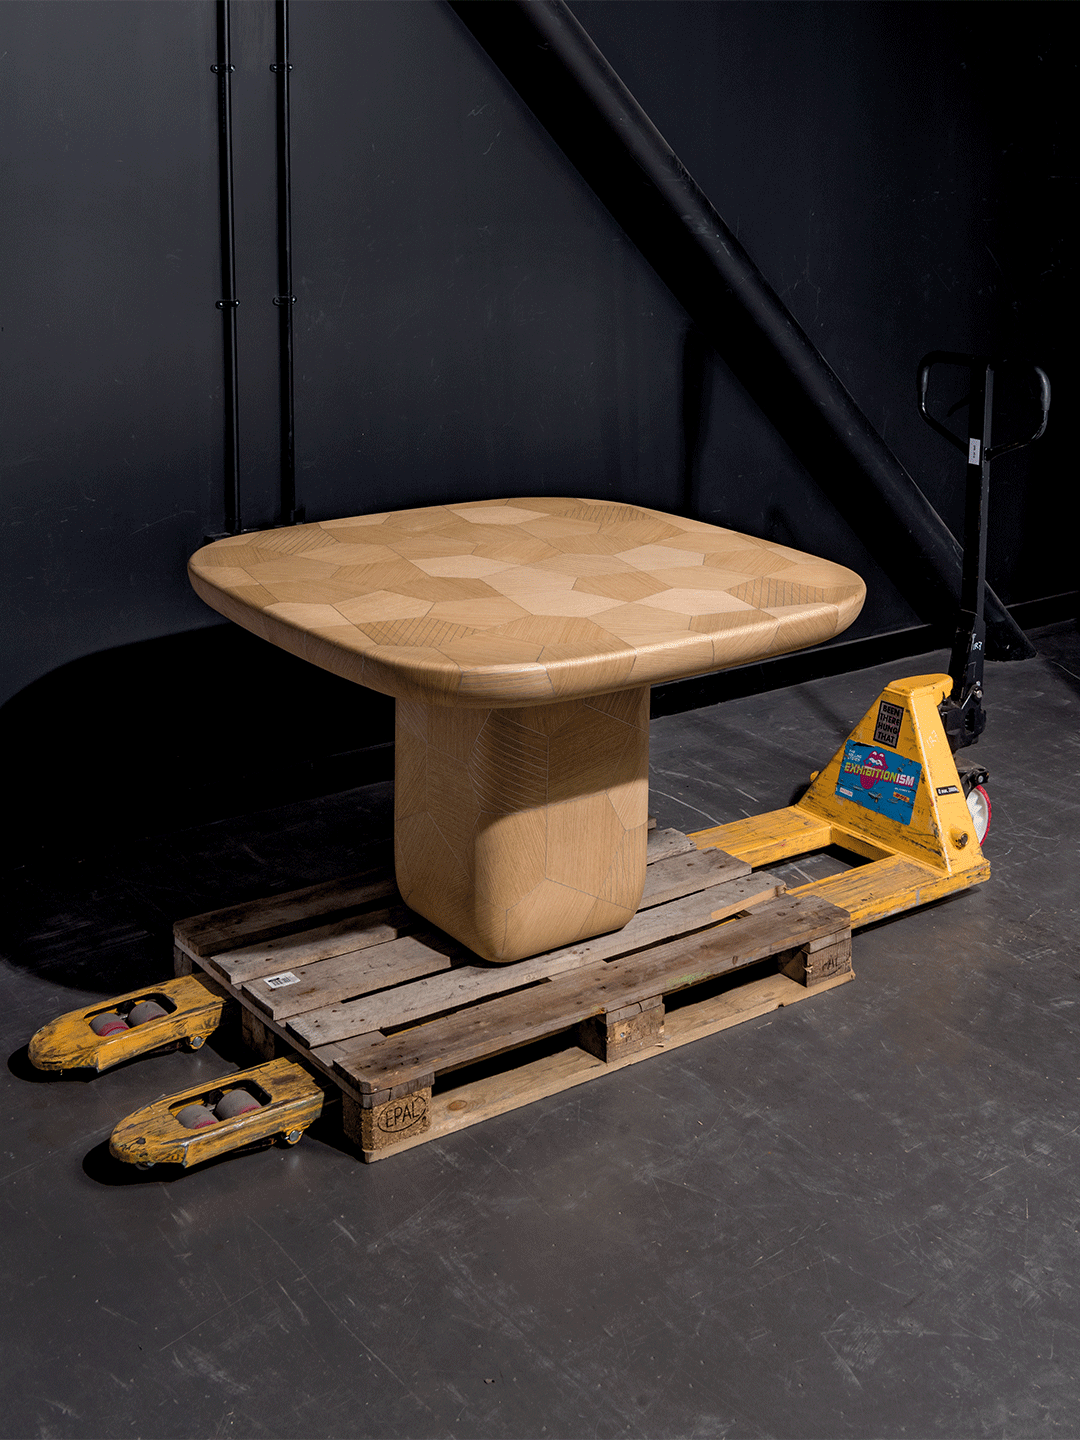 Imprint Dining Table by Nada Debs.